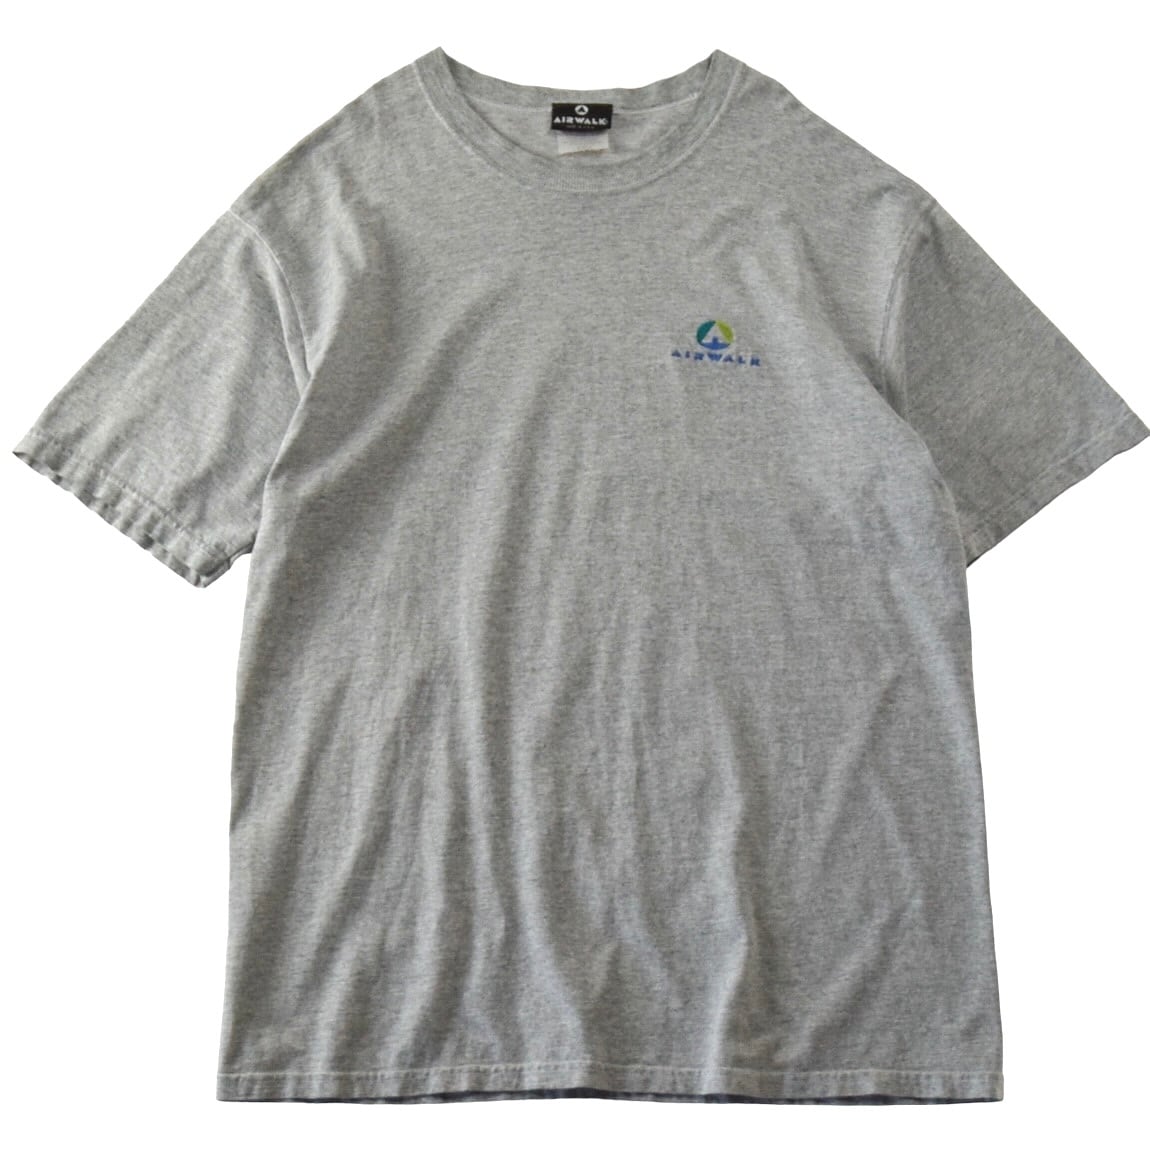 's   's "AIR WALK" Vintage S/S Logo T shirt Made In USA